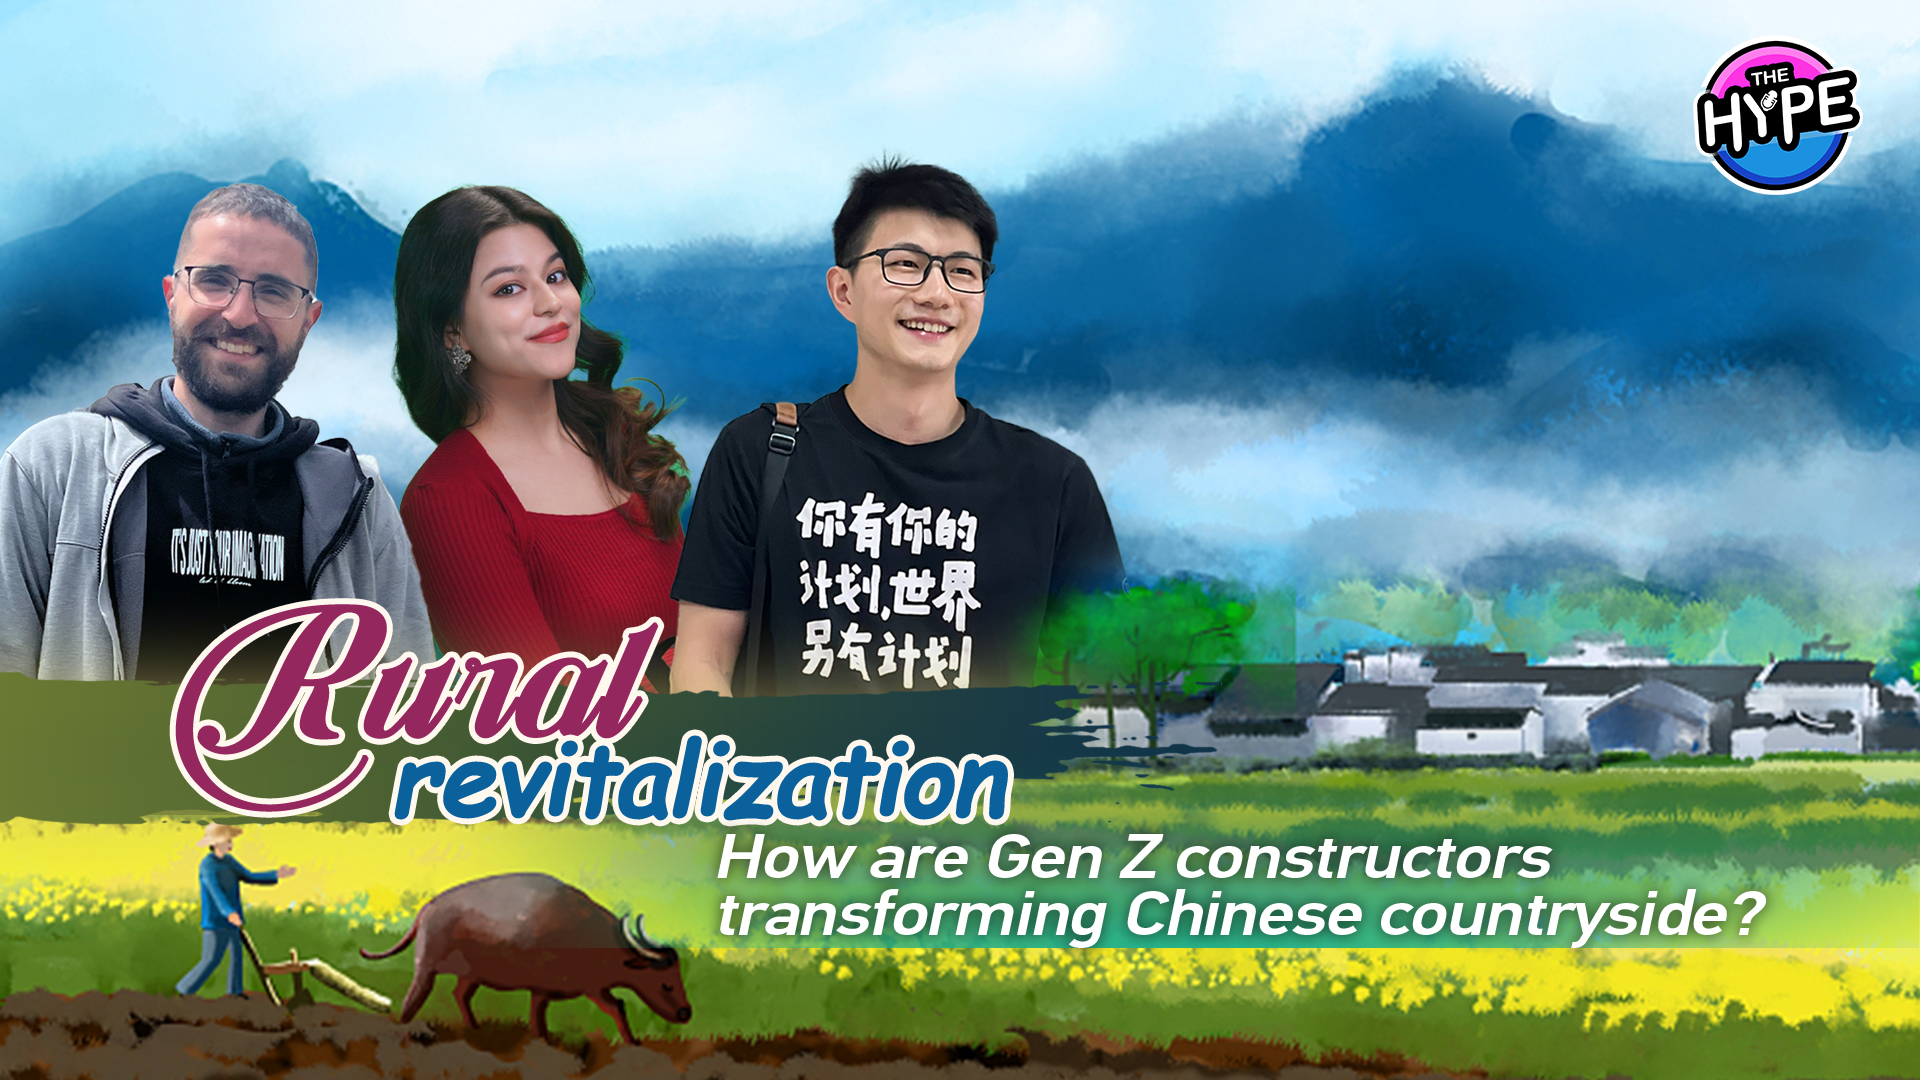 Live: How are Gen Z constructors transforming Chinese countryside?